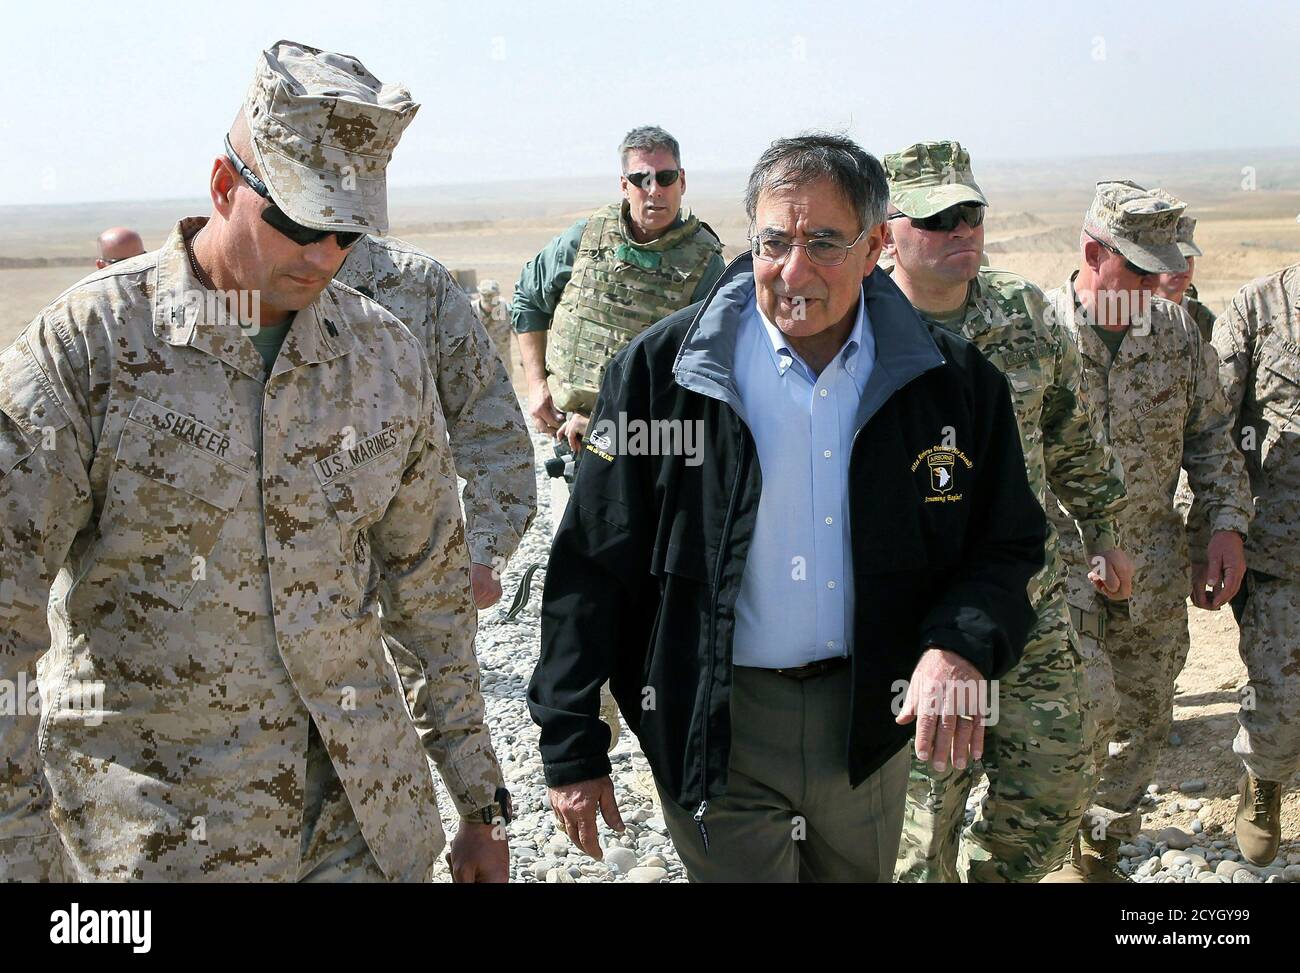 U.S. Defense Secretary Leon Panetta is greeted by Col. John Shafer (L) with RTC 6 after arriving to greet troops at Forward Operating Base Shukvani, Afghanistan March 14, 2012. Panetta told troops in Afghanistan on Wednesday that the massacre of 16 Afghan civilians by an American soldier should not deter them from their mission to secure the country ahead of a 2014 NATO withdrawal deadline.  REUTERS/Scott Olson/Pool  (AFGHANISTAN - Tags: POLITICS MILITARY) Stock Photo